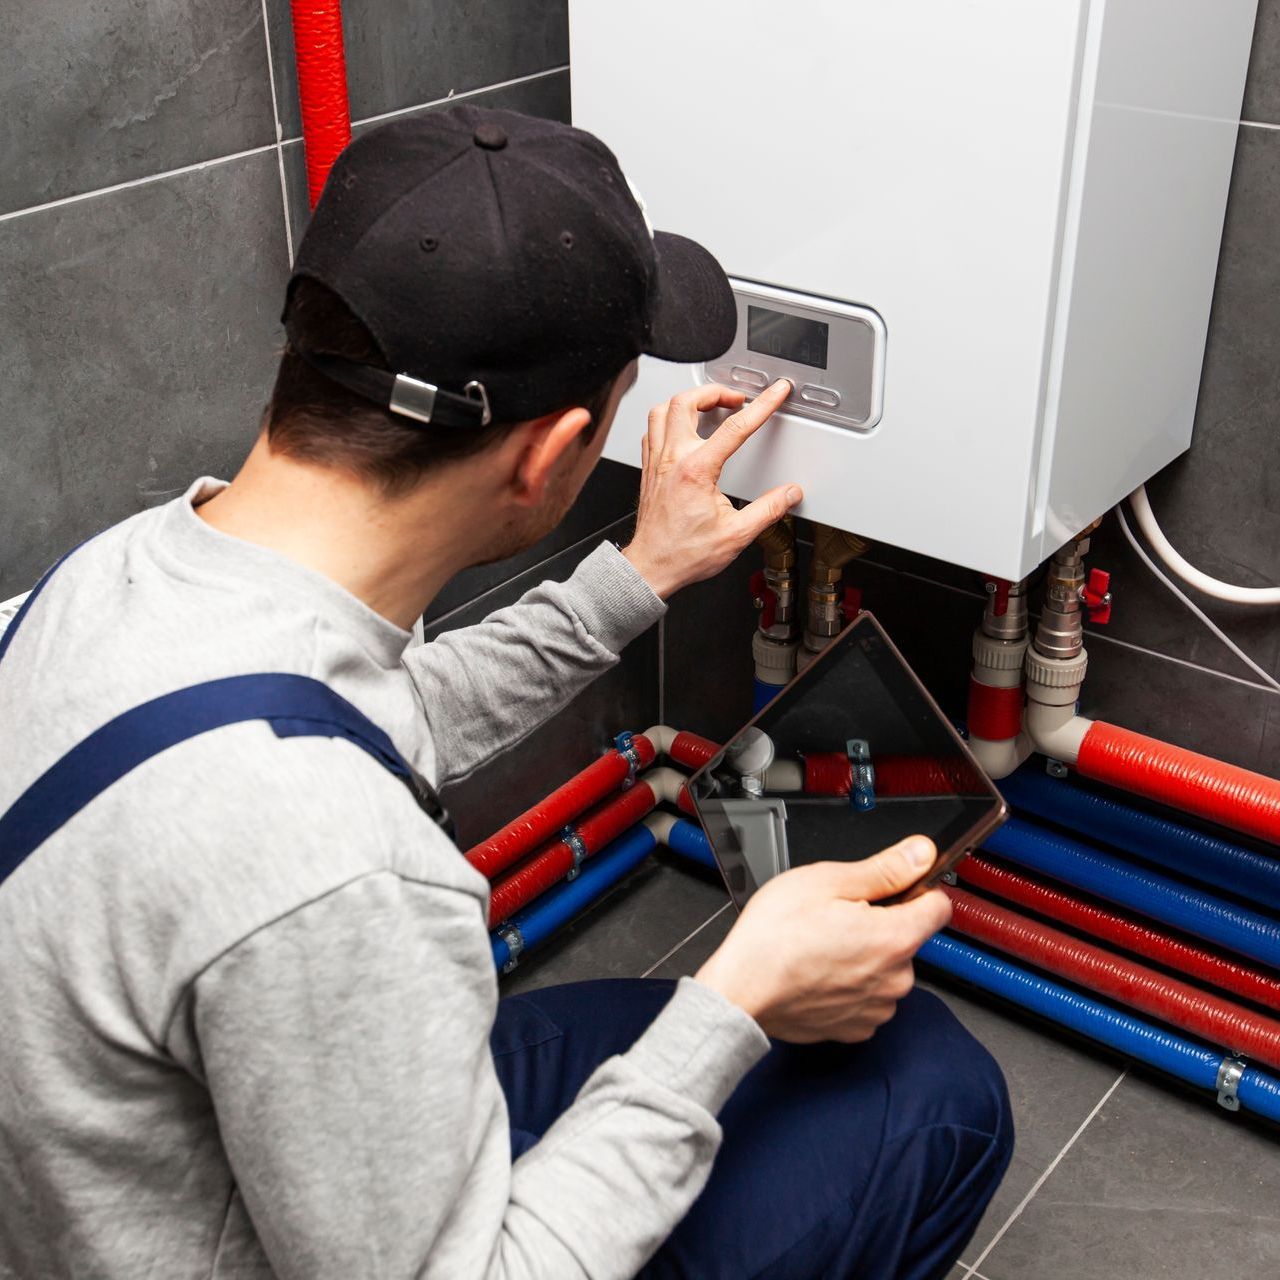 a man is kneeling down in front of a boiler and looking at a tablet .